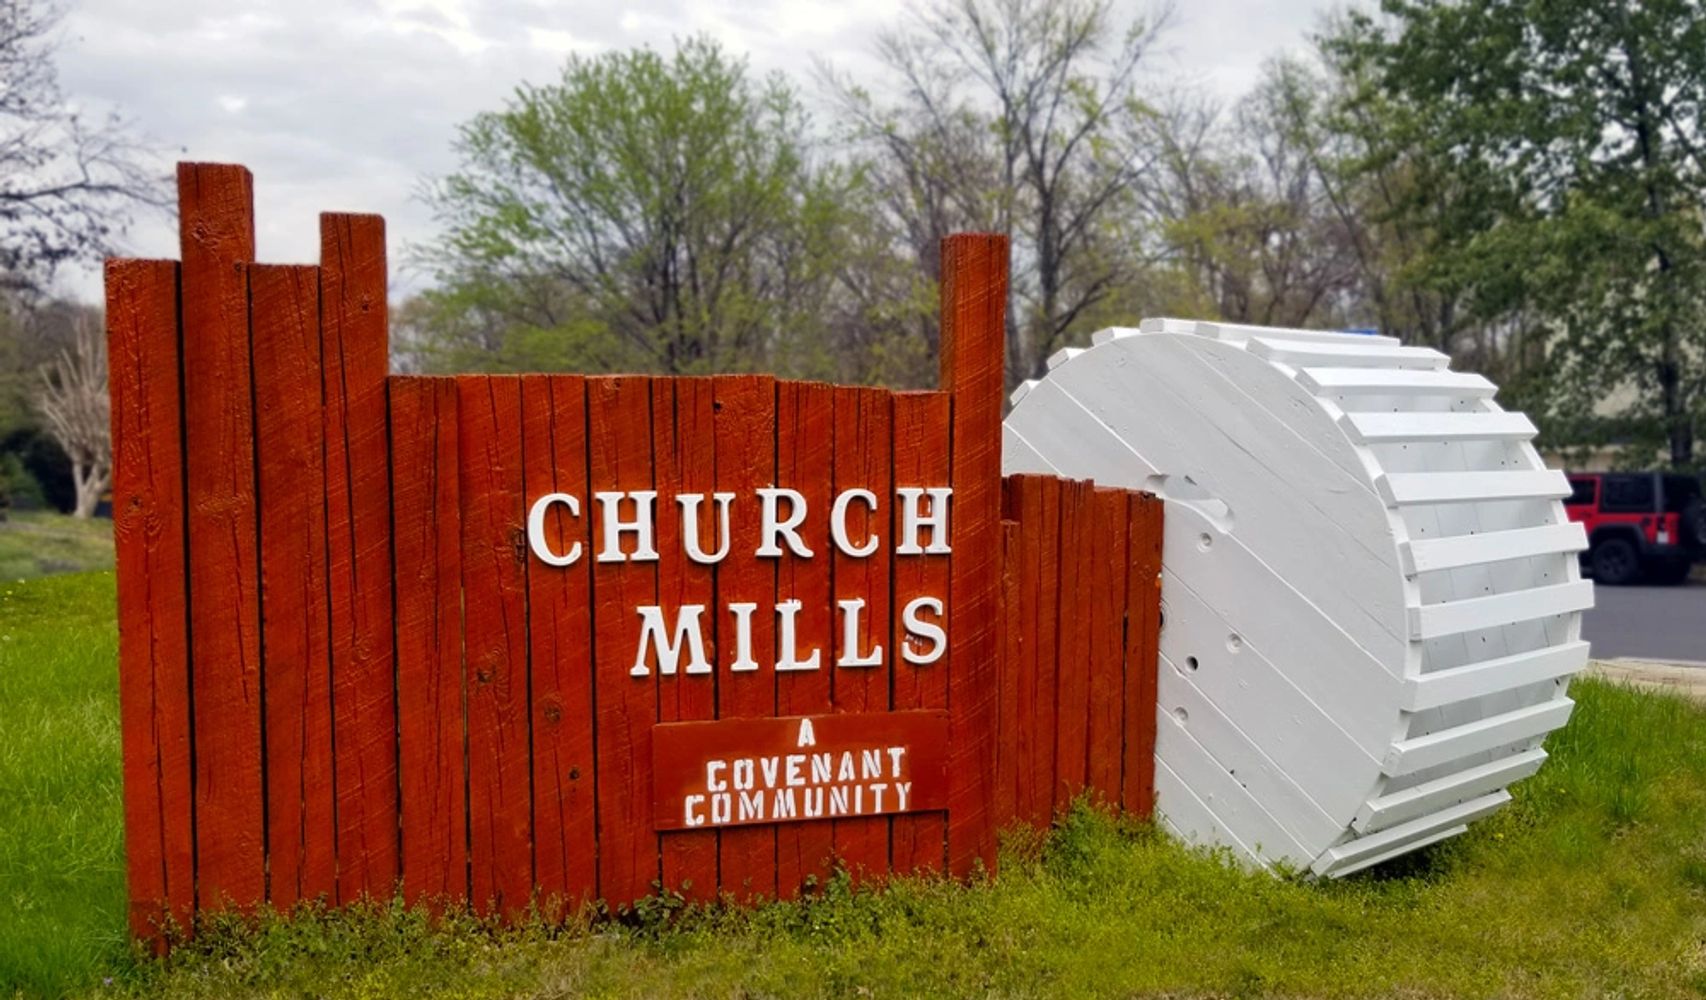 Church Mills Entrance Sign. Photo Credit: Brian Uri, used with permission.